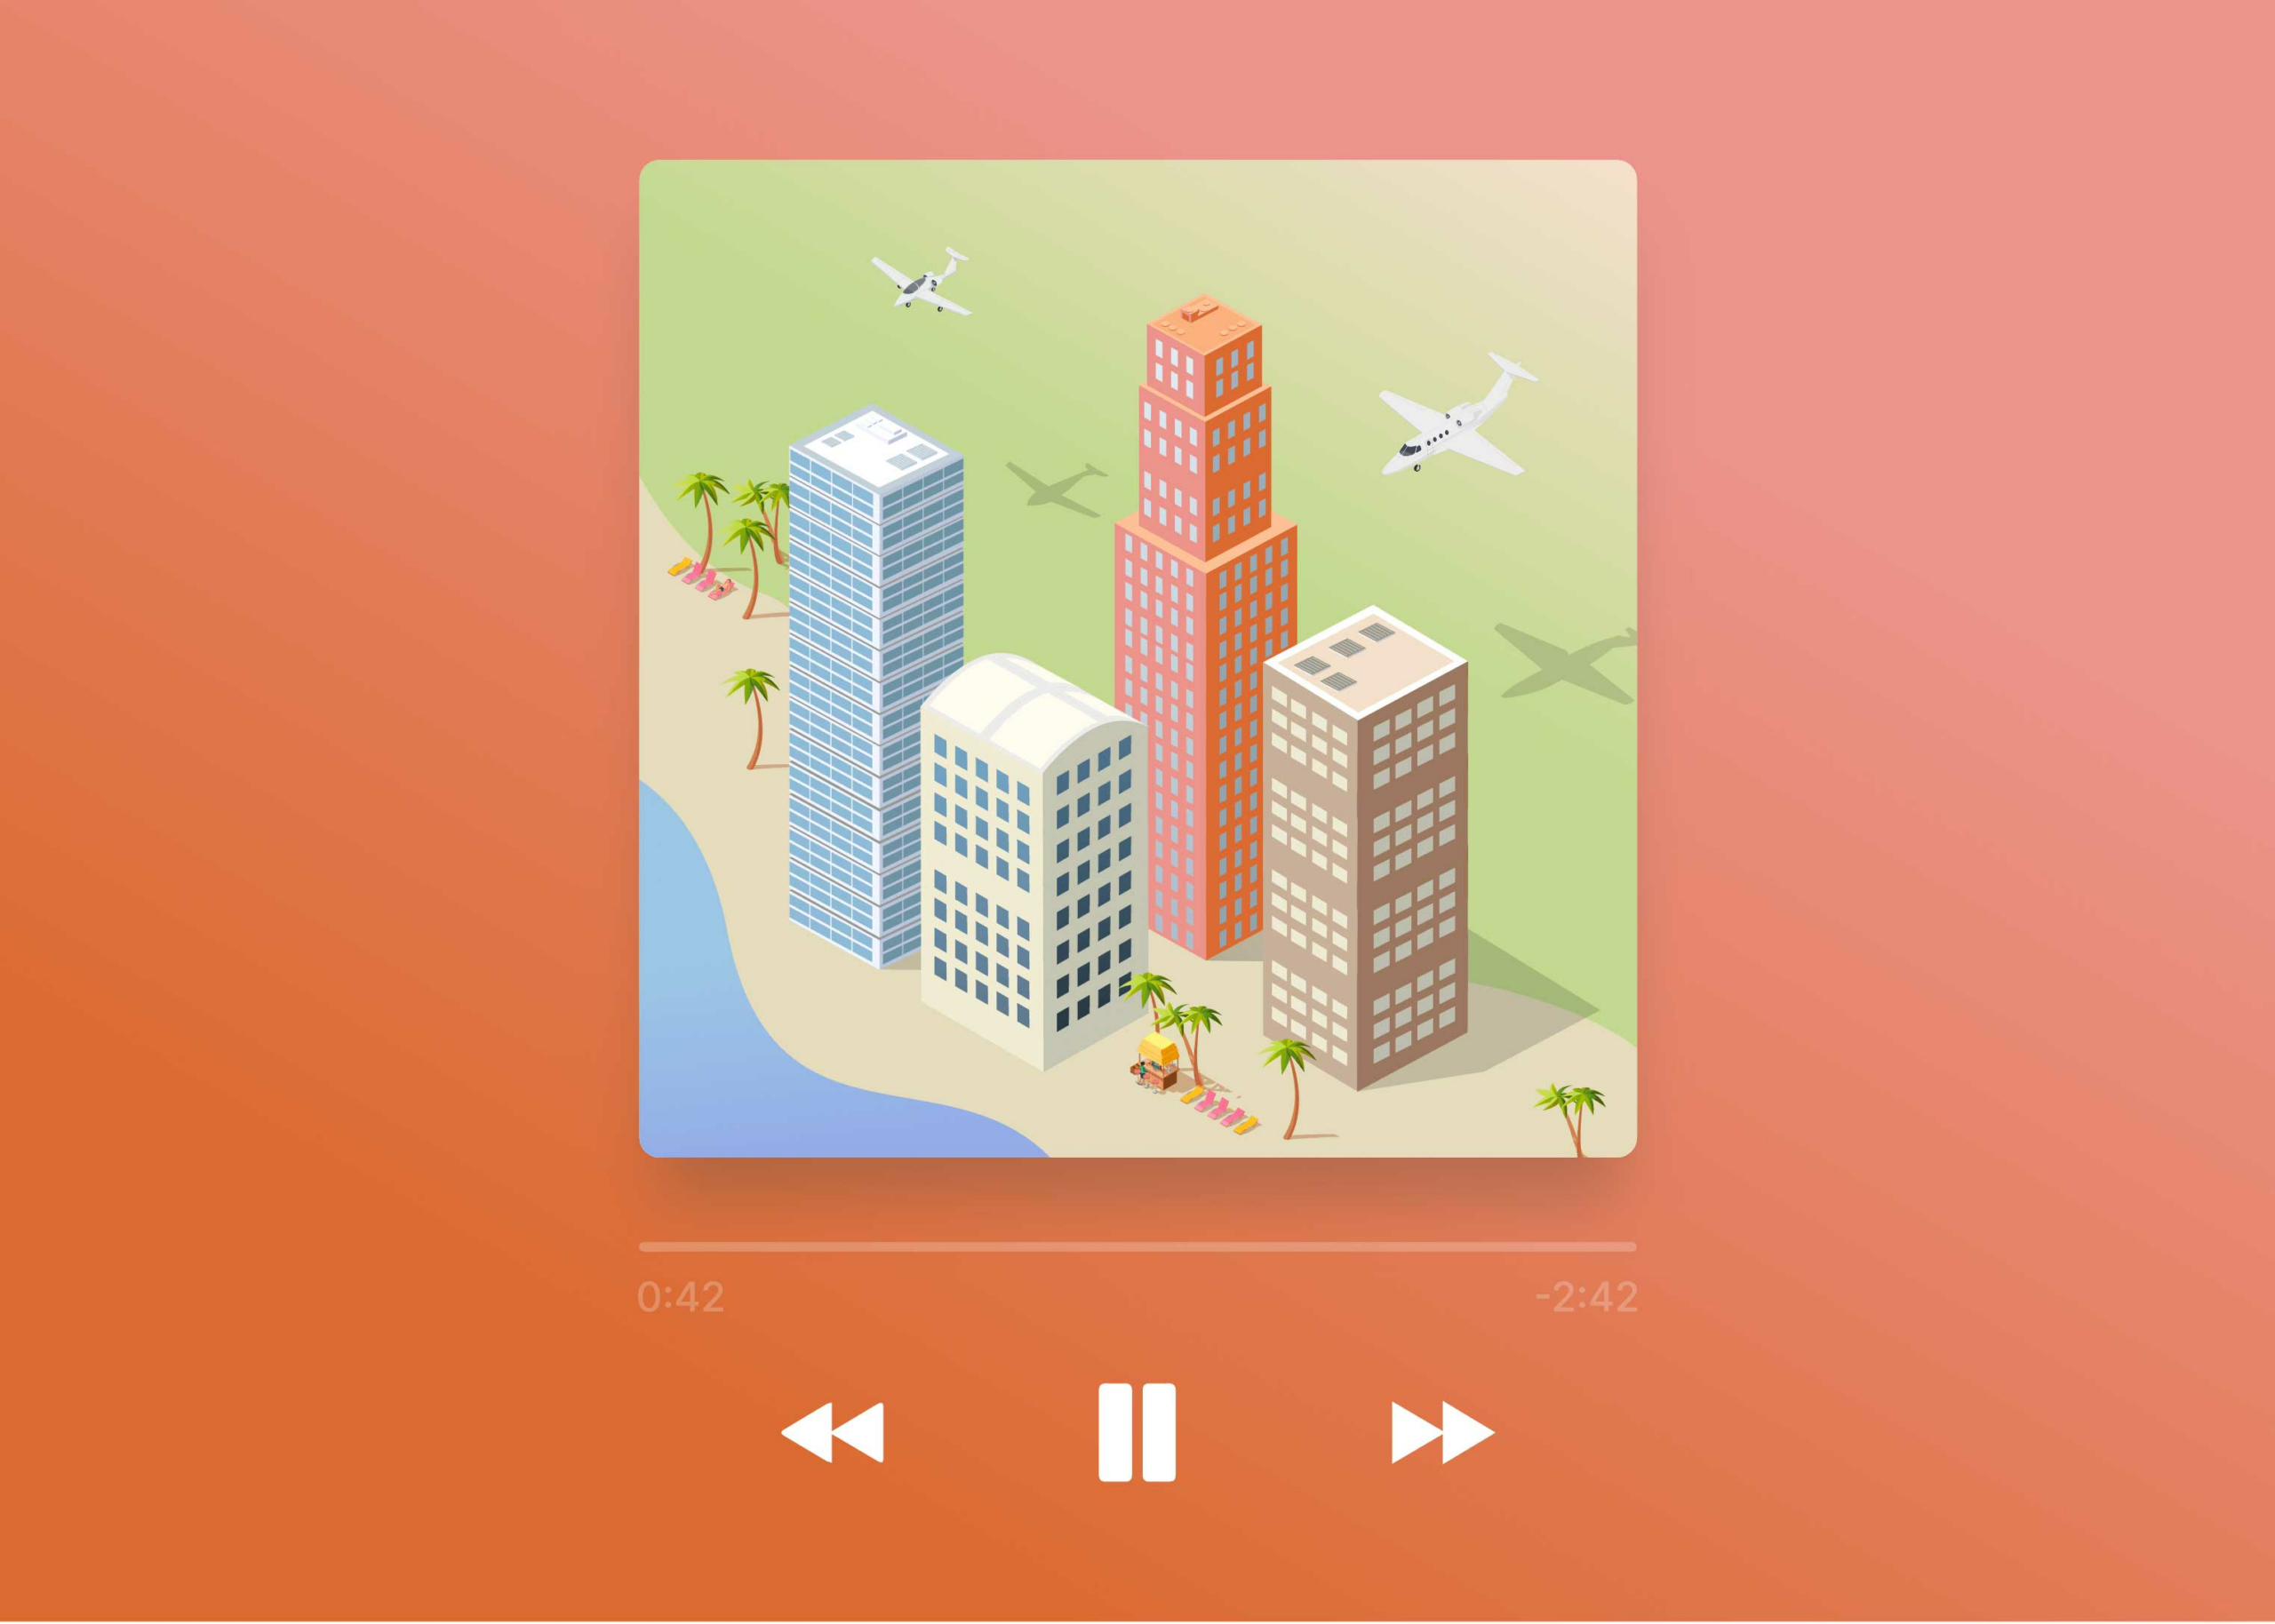 Syncing your travel dreams: Apple music users & their interest in travel sites.